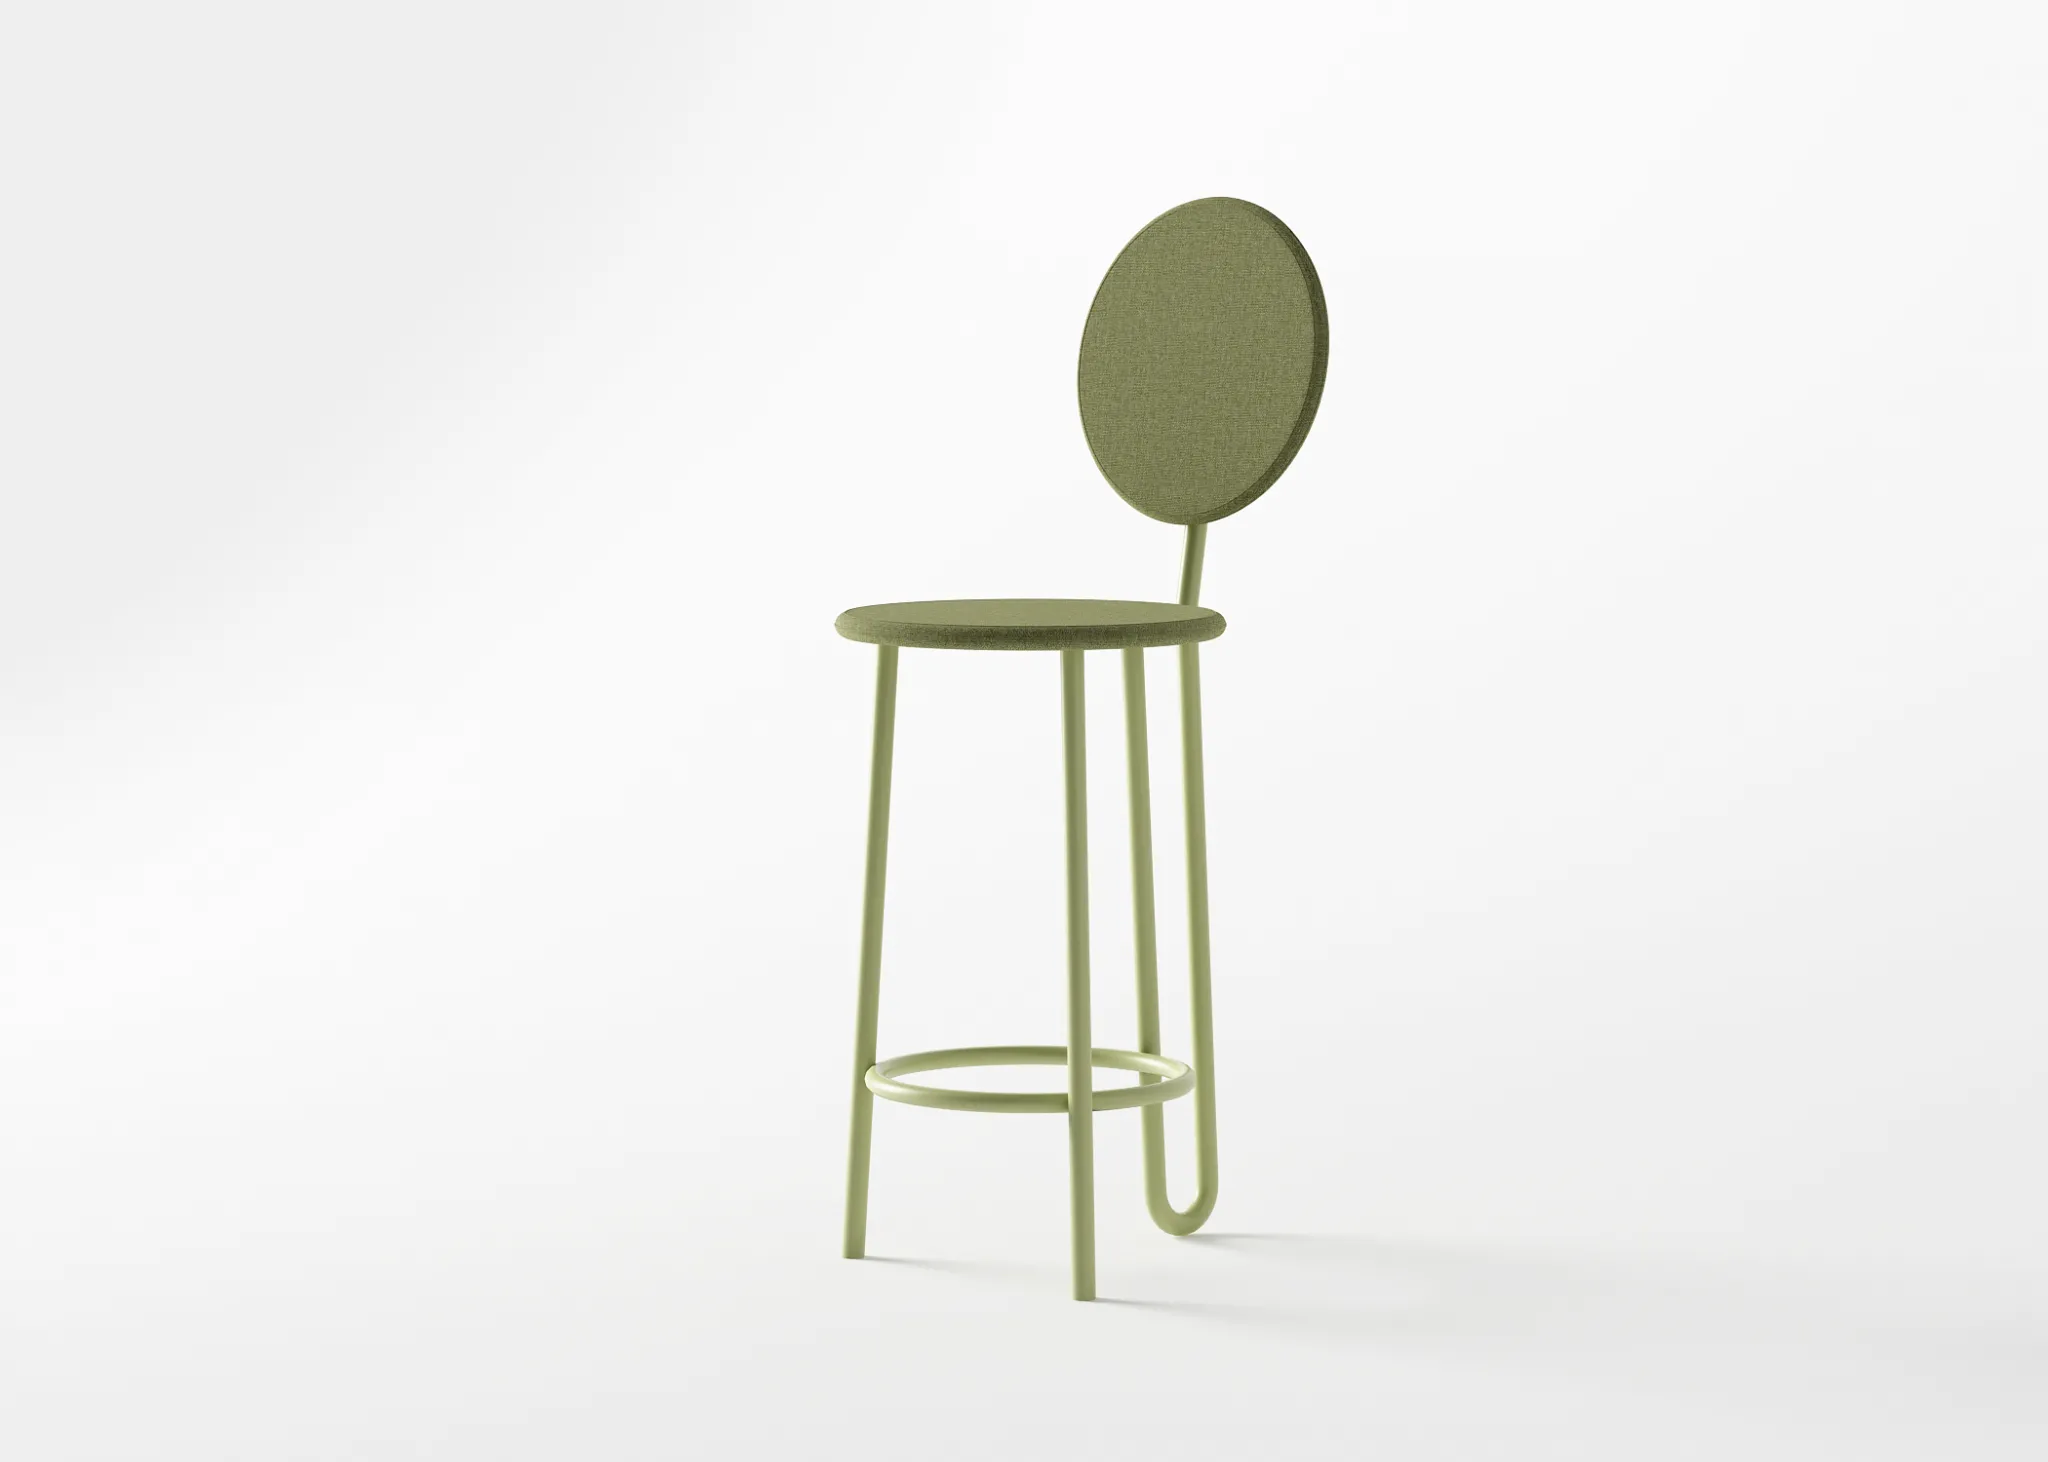 FURNITURE 3D MODELS – CHAIRS – 0252